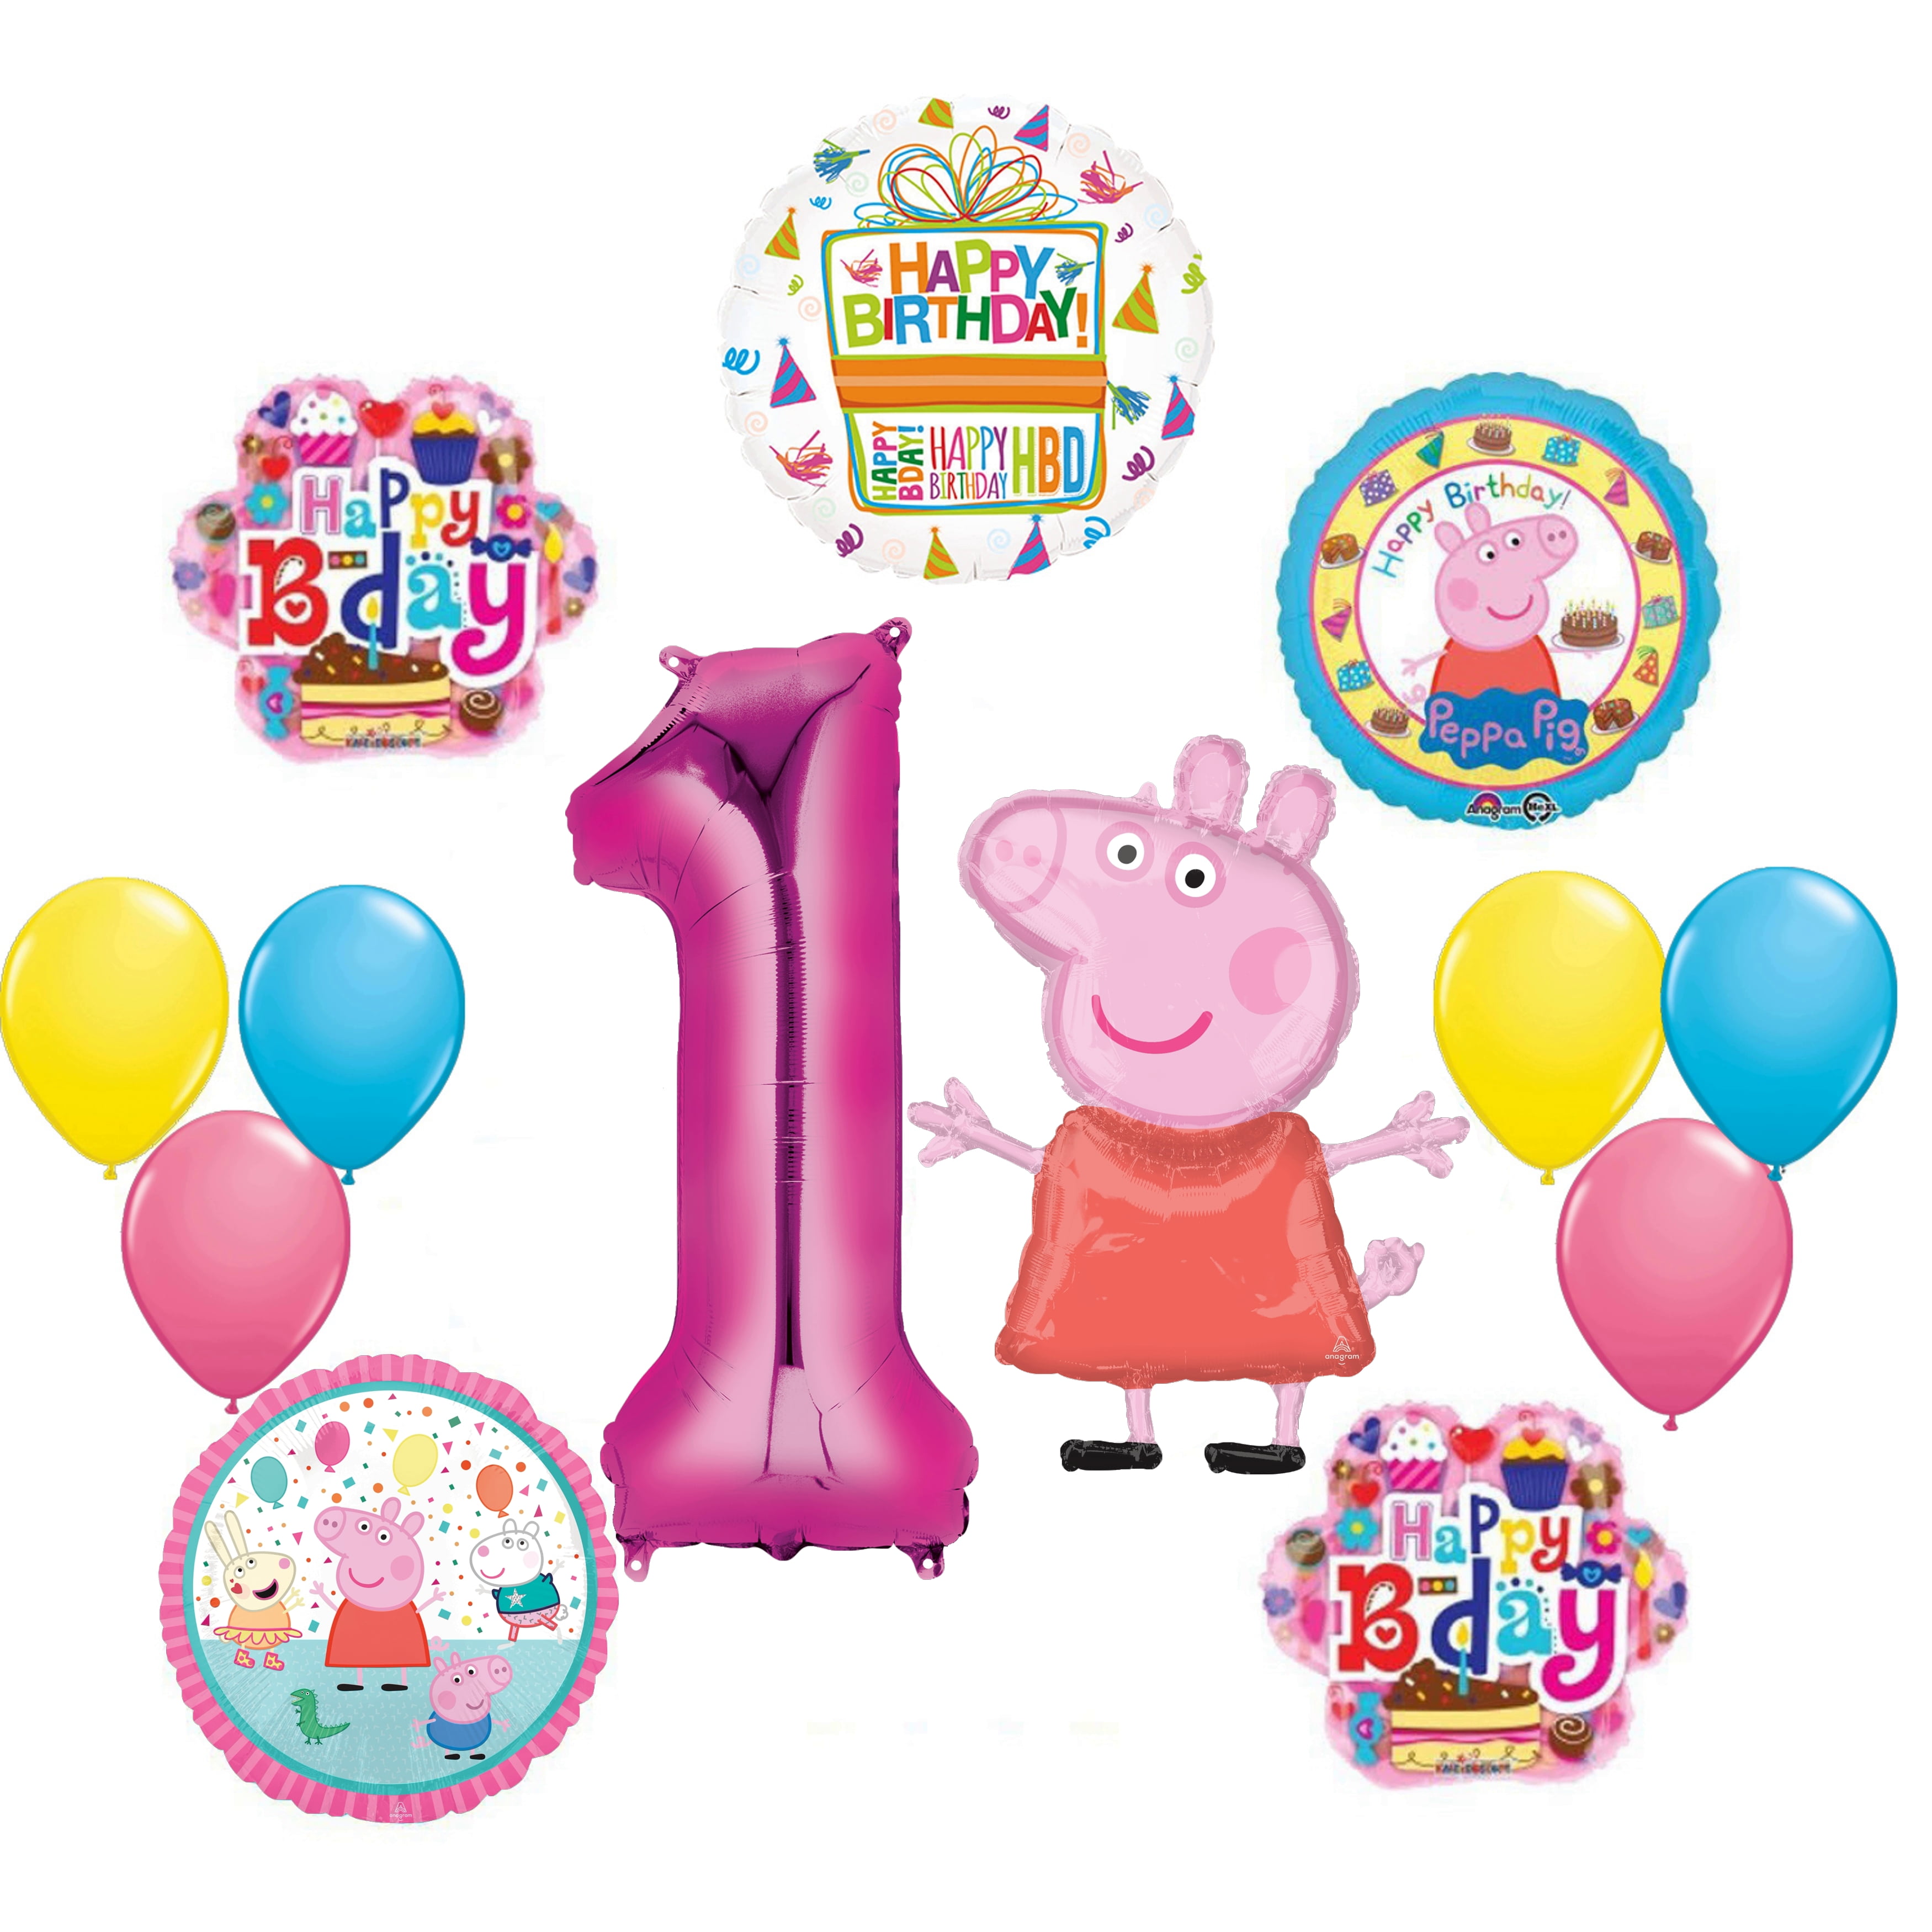 Peppa Pig 1st Birthday Party Balloon Supplies And Decorations Kit